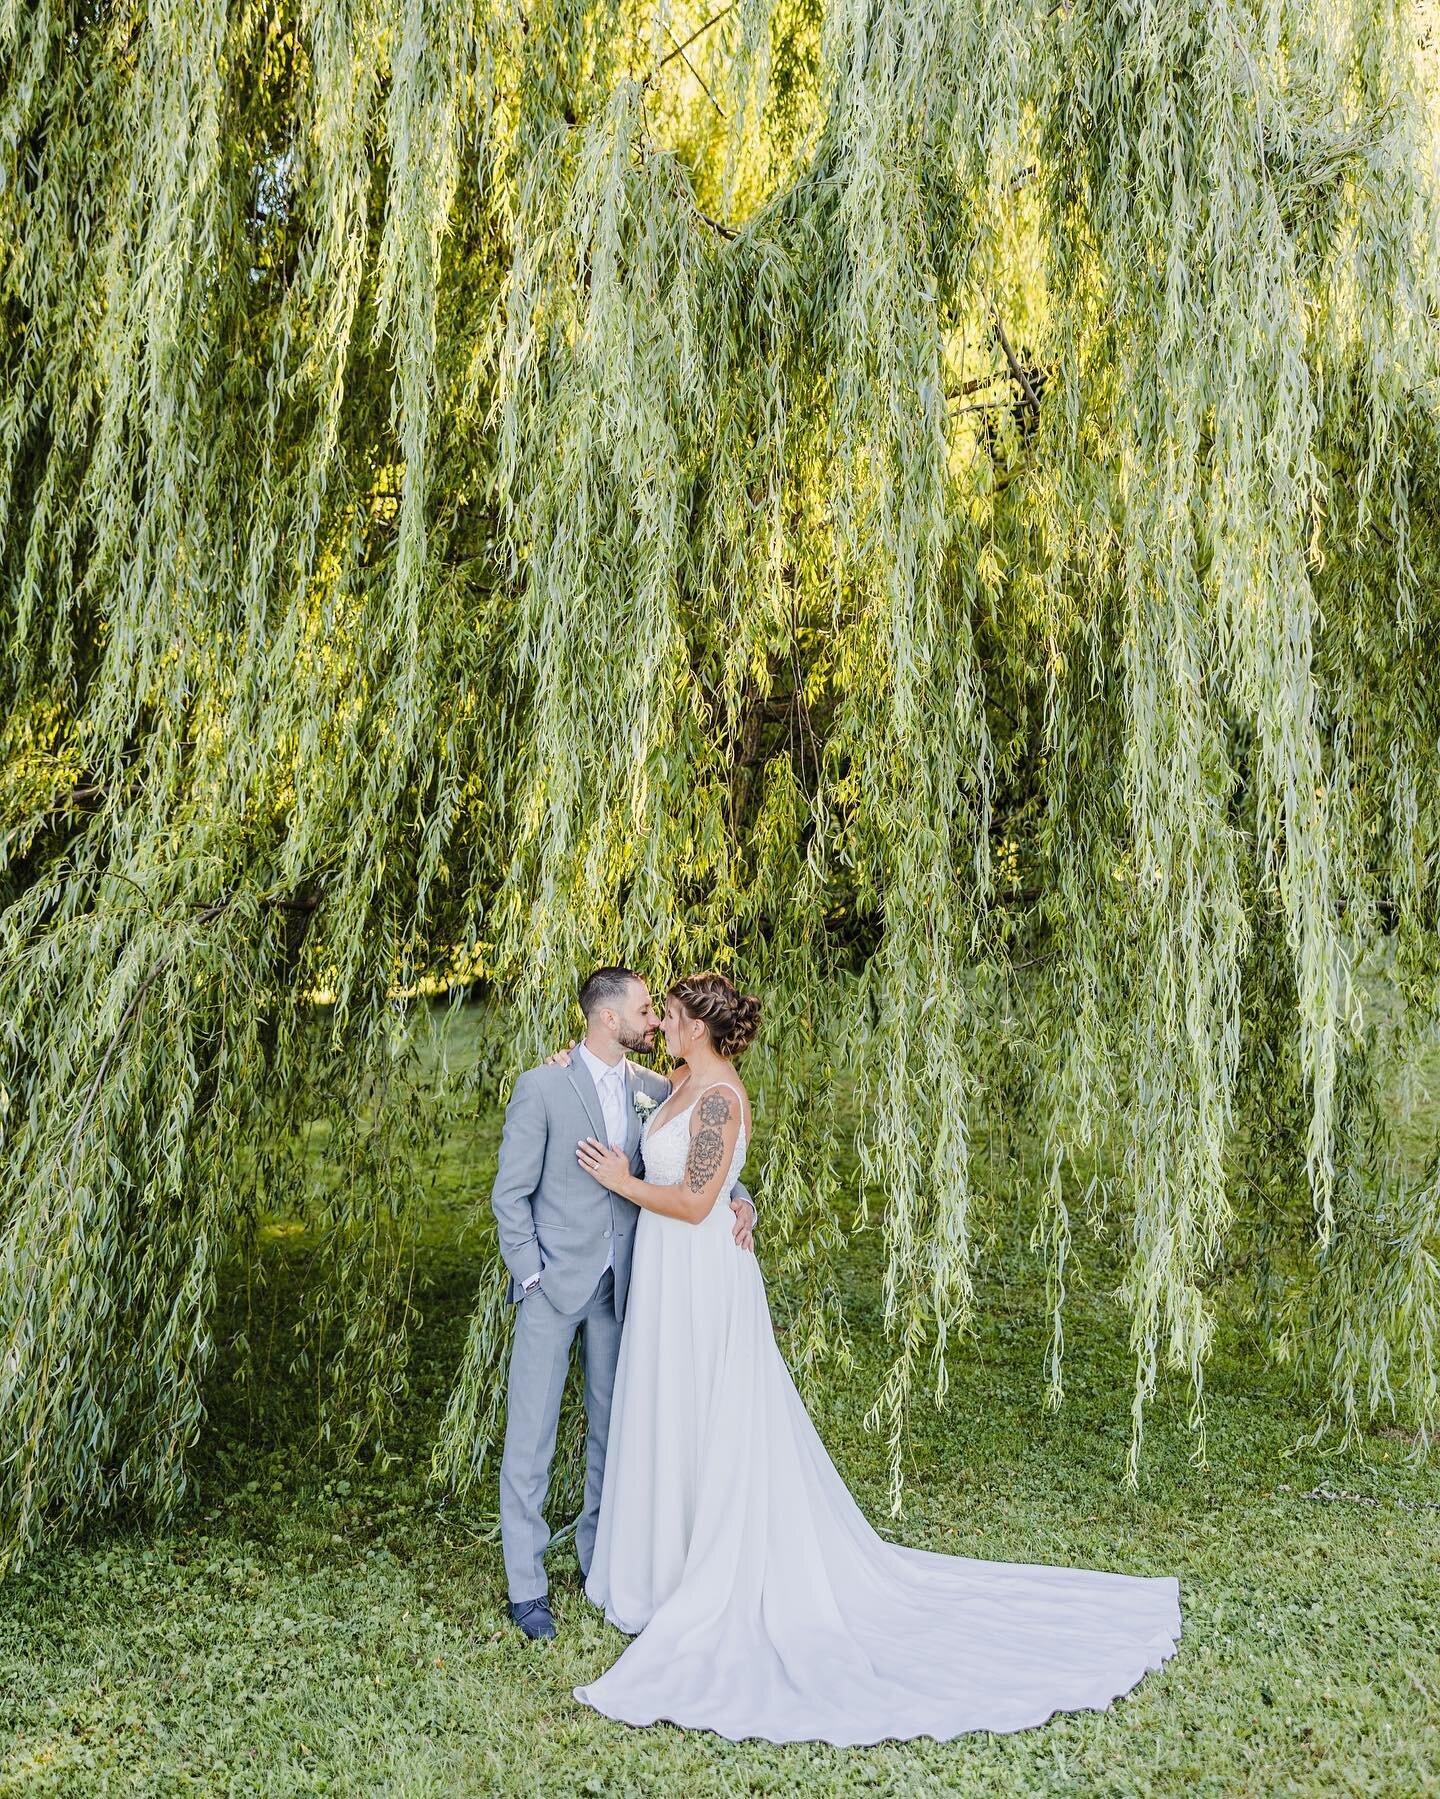 I live for a willow tree moment. Katie + Dino nailed the bride and groom vibe